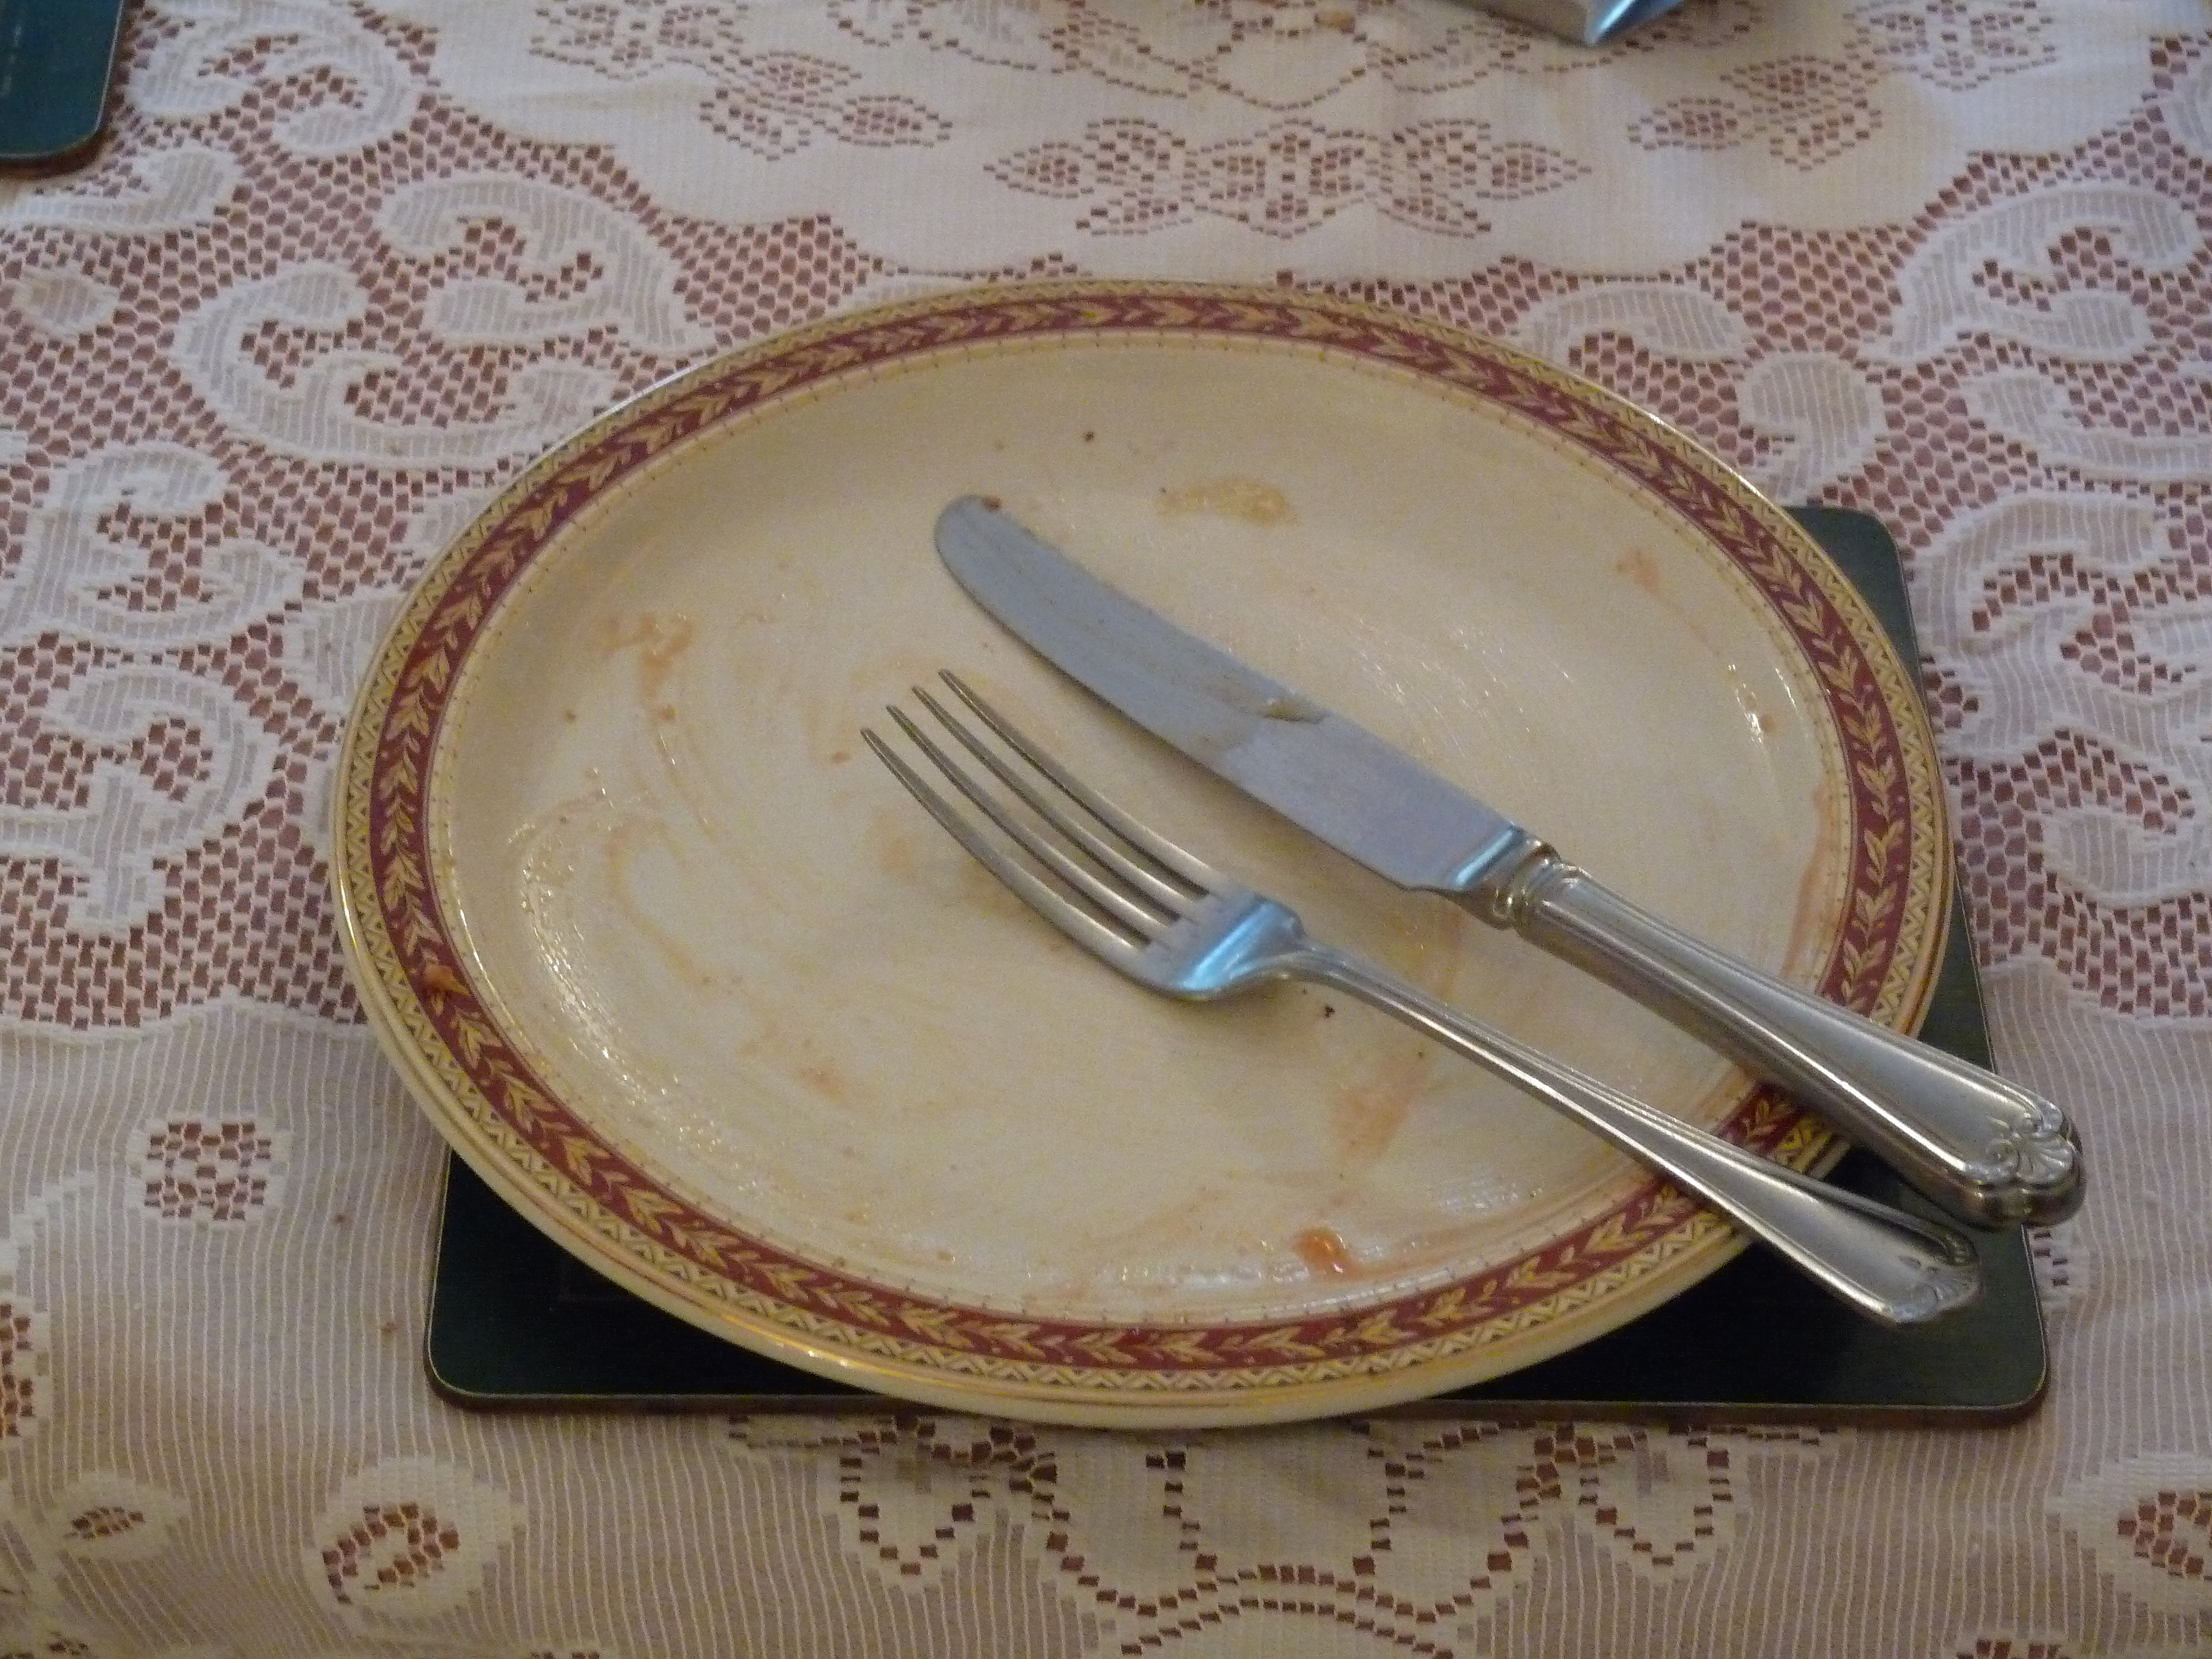 An cleaned plate of food.